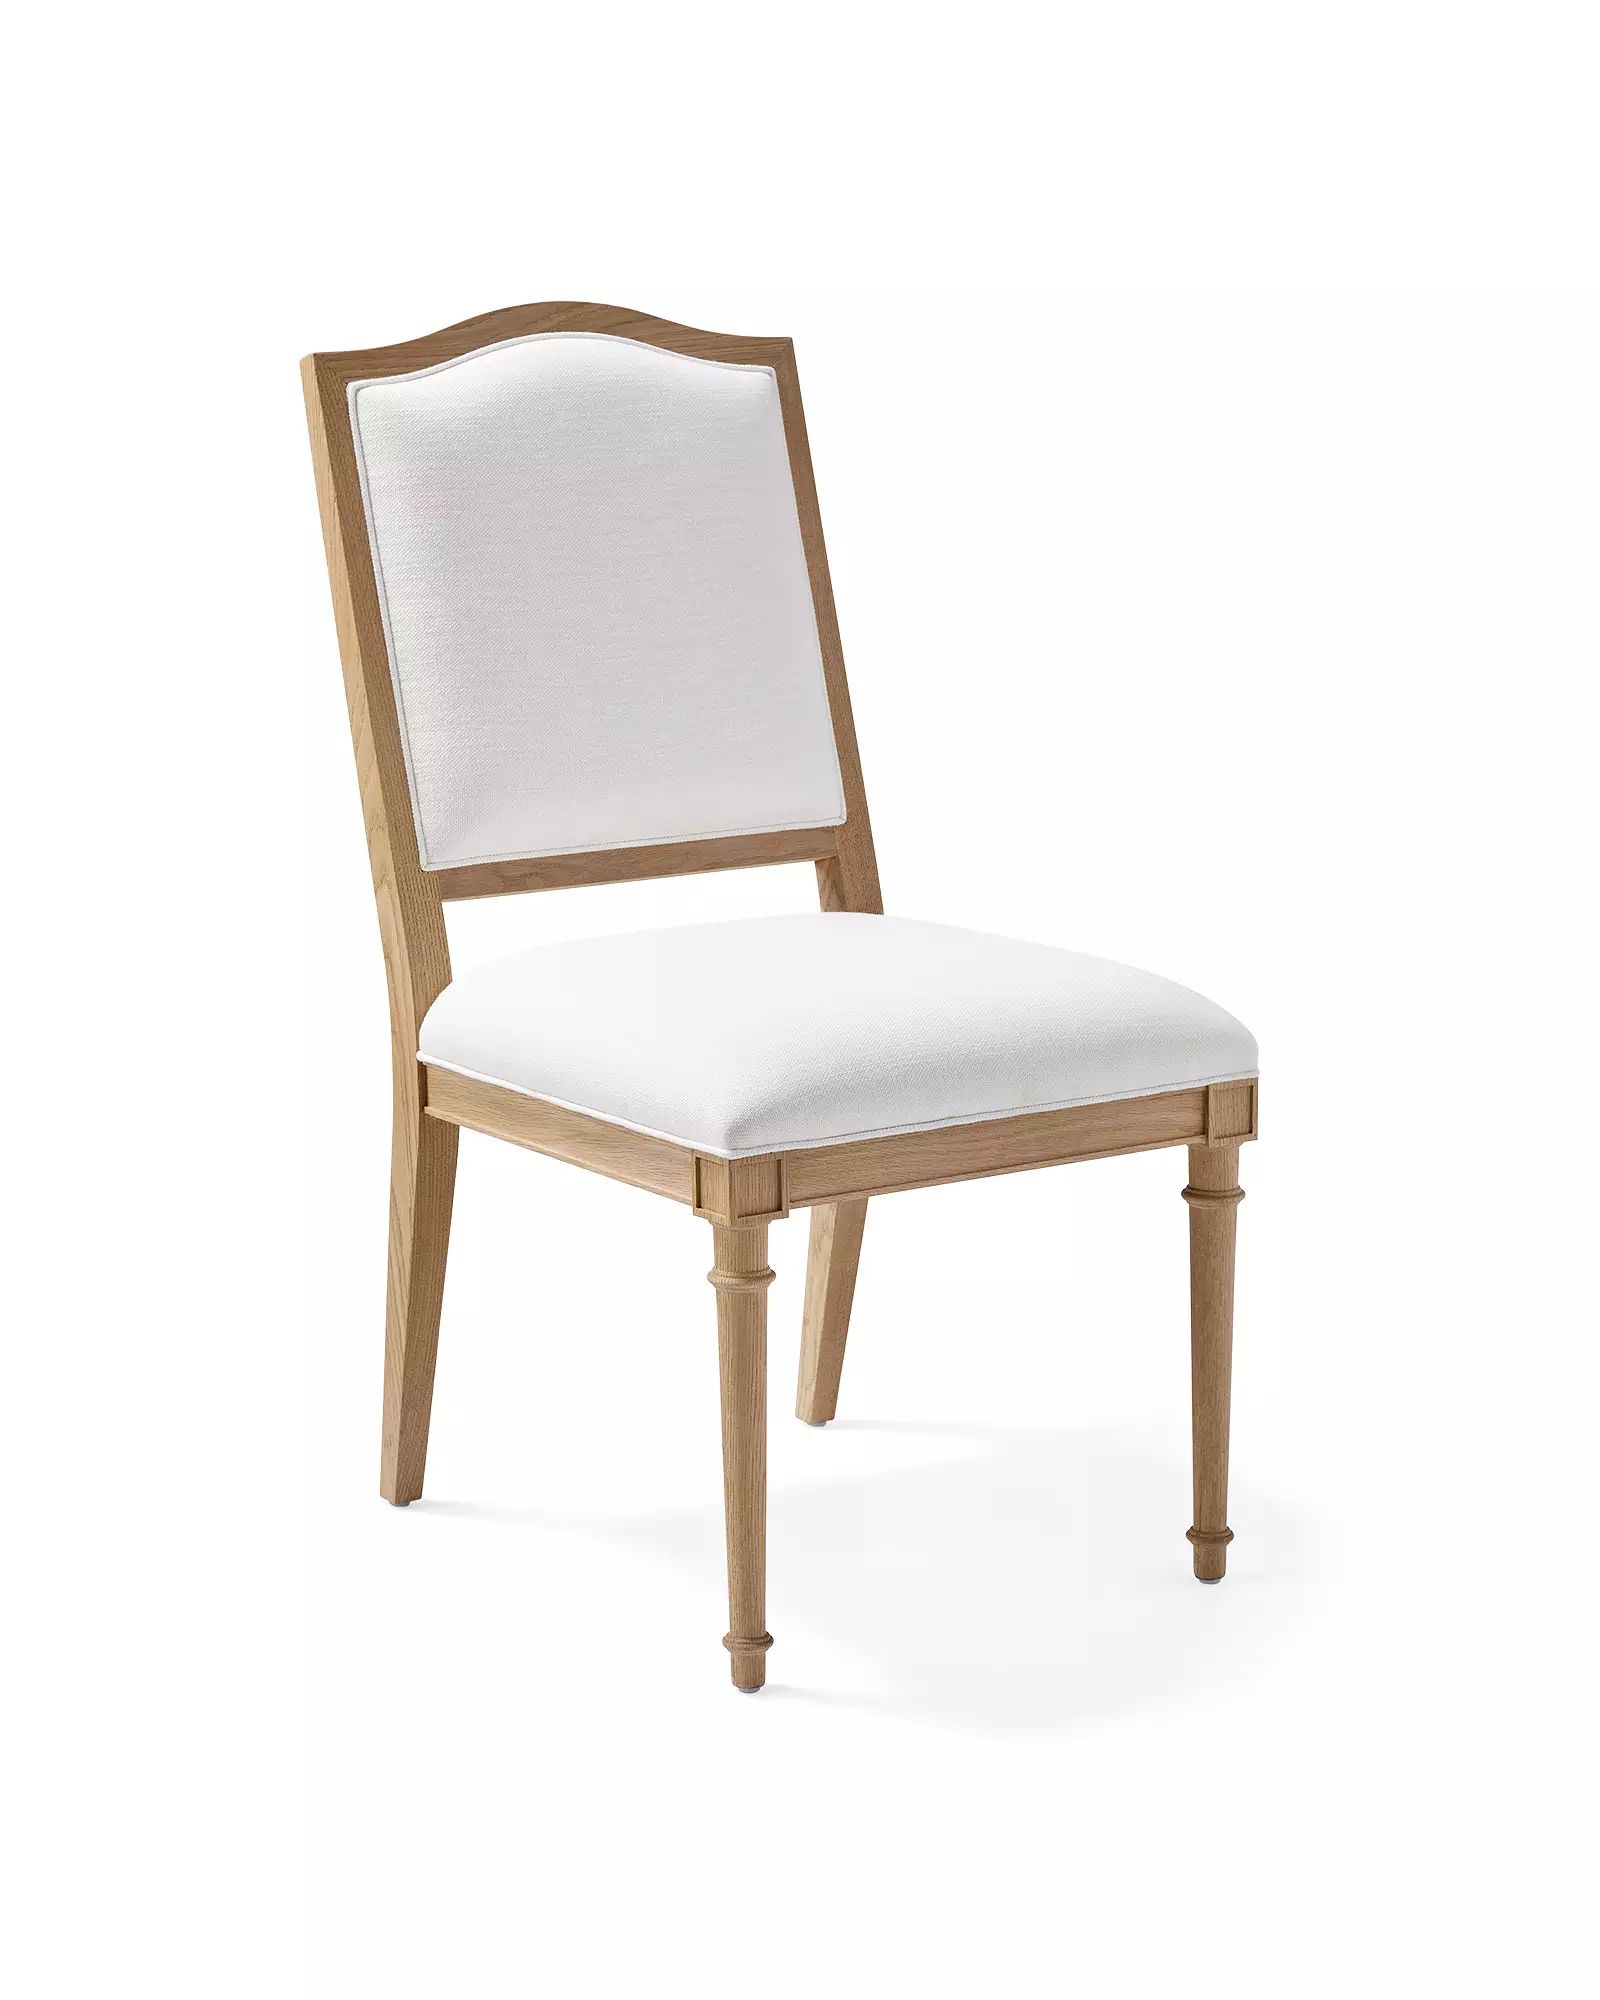 Caledonia Dining Chair | Serena and Lily